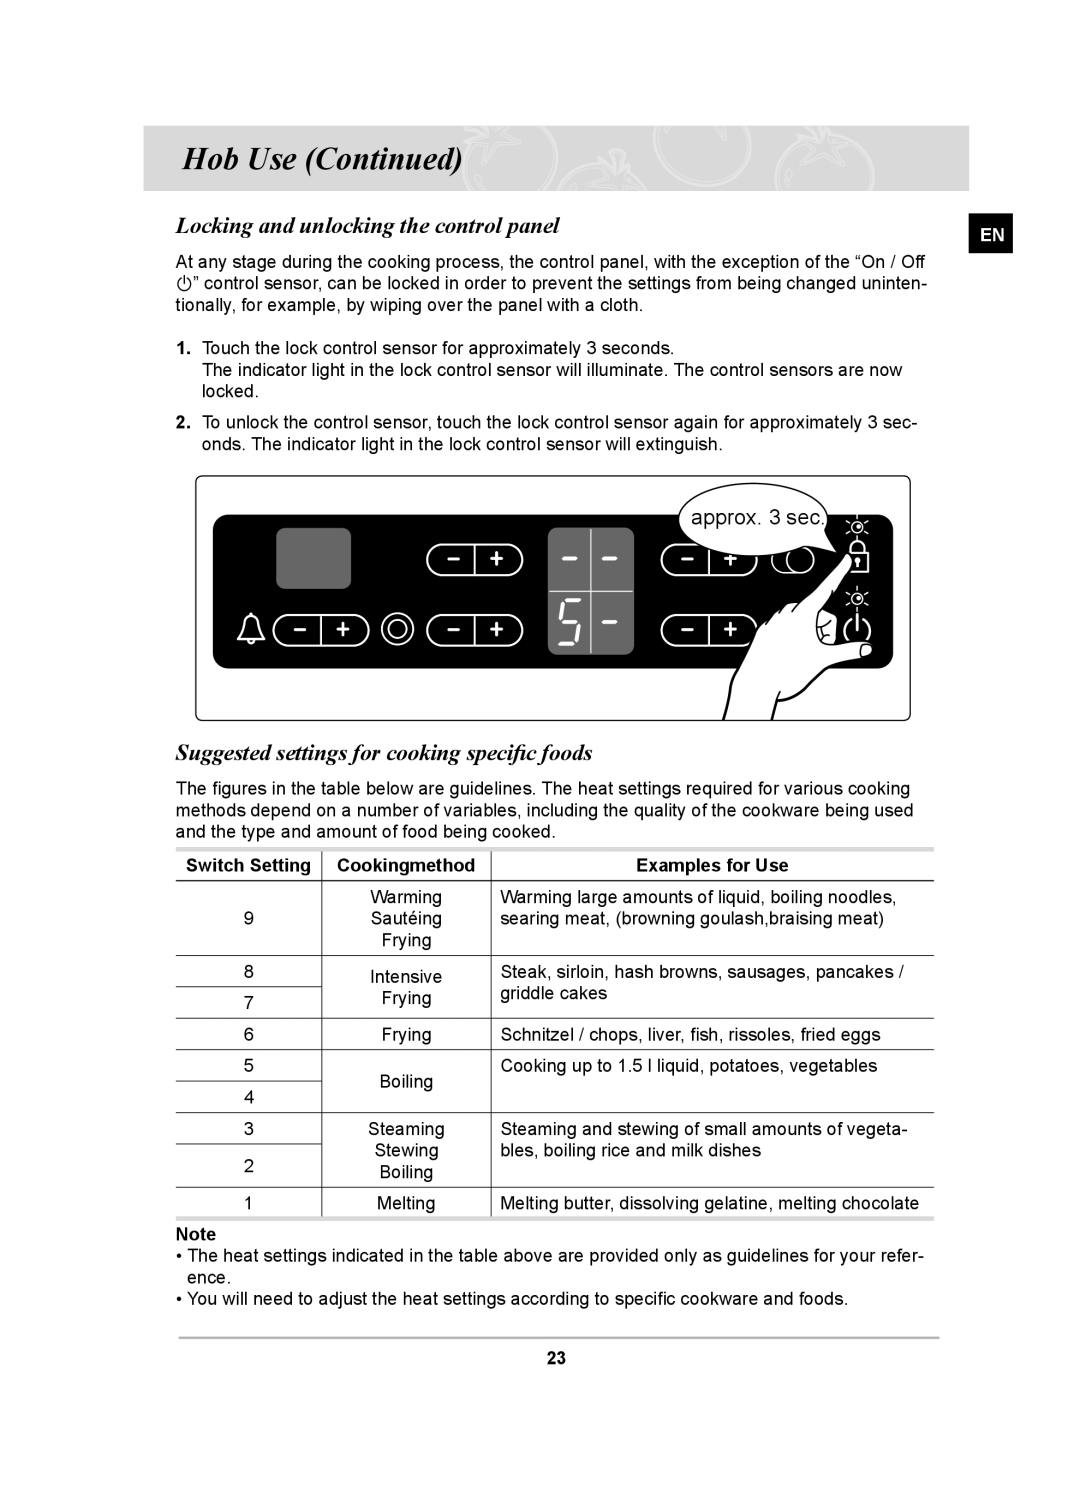 Samsung C61RCCN/SLI manual Locking and unlocking the control panel, Suggested settings for cooking speciﬁc foods 